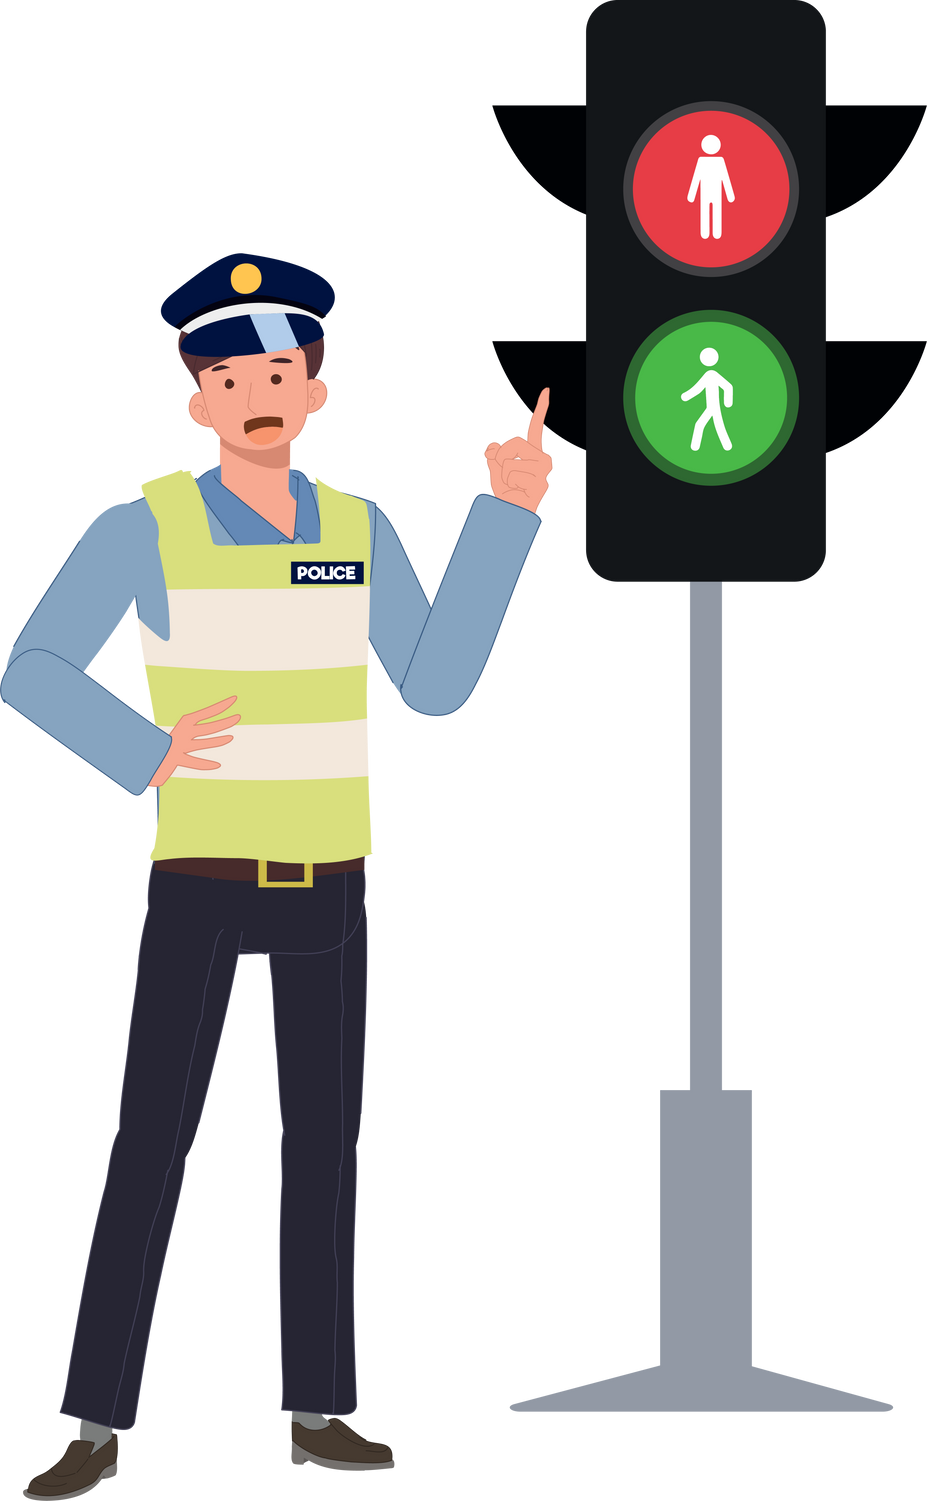 A traffic police is pointing index finger to traffic light to teaching traffic rule.